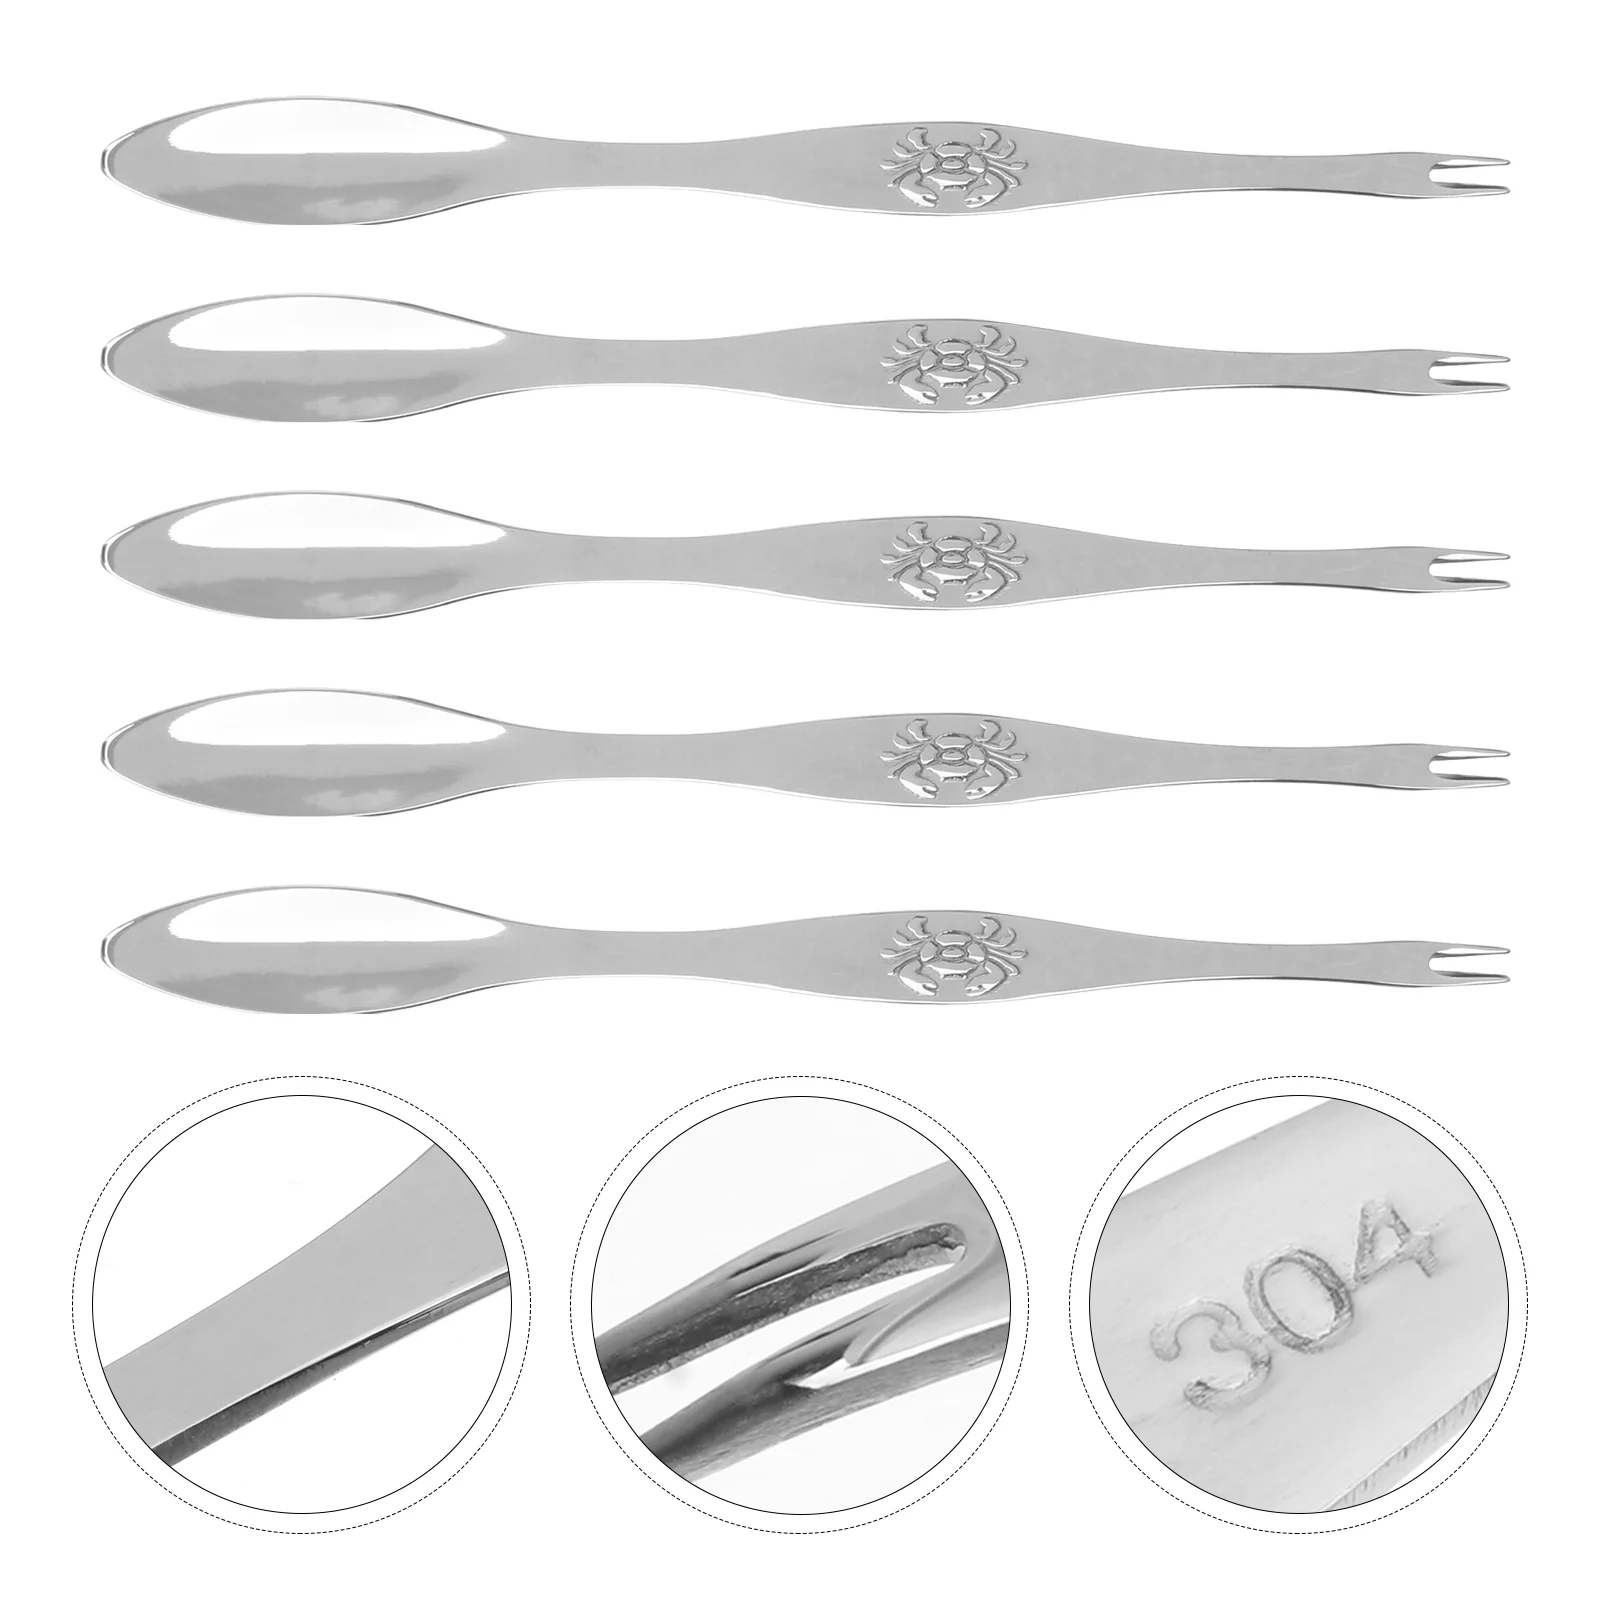 

5 Pcs Stainless Steel Crab Fork Forks Tool Cocktail Tools Lobster Seafood Eating